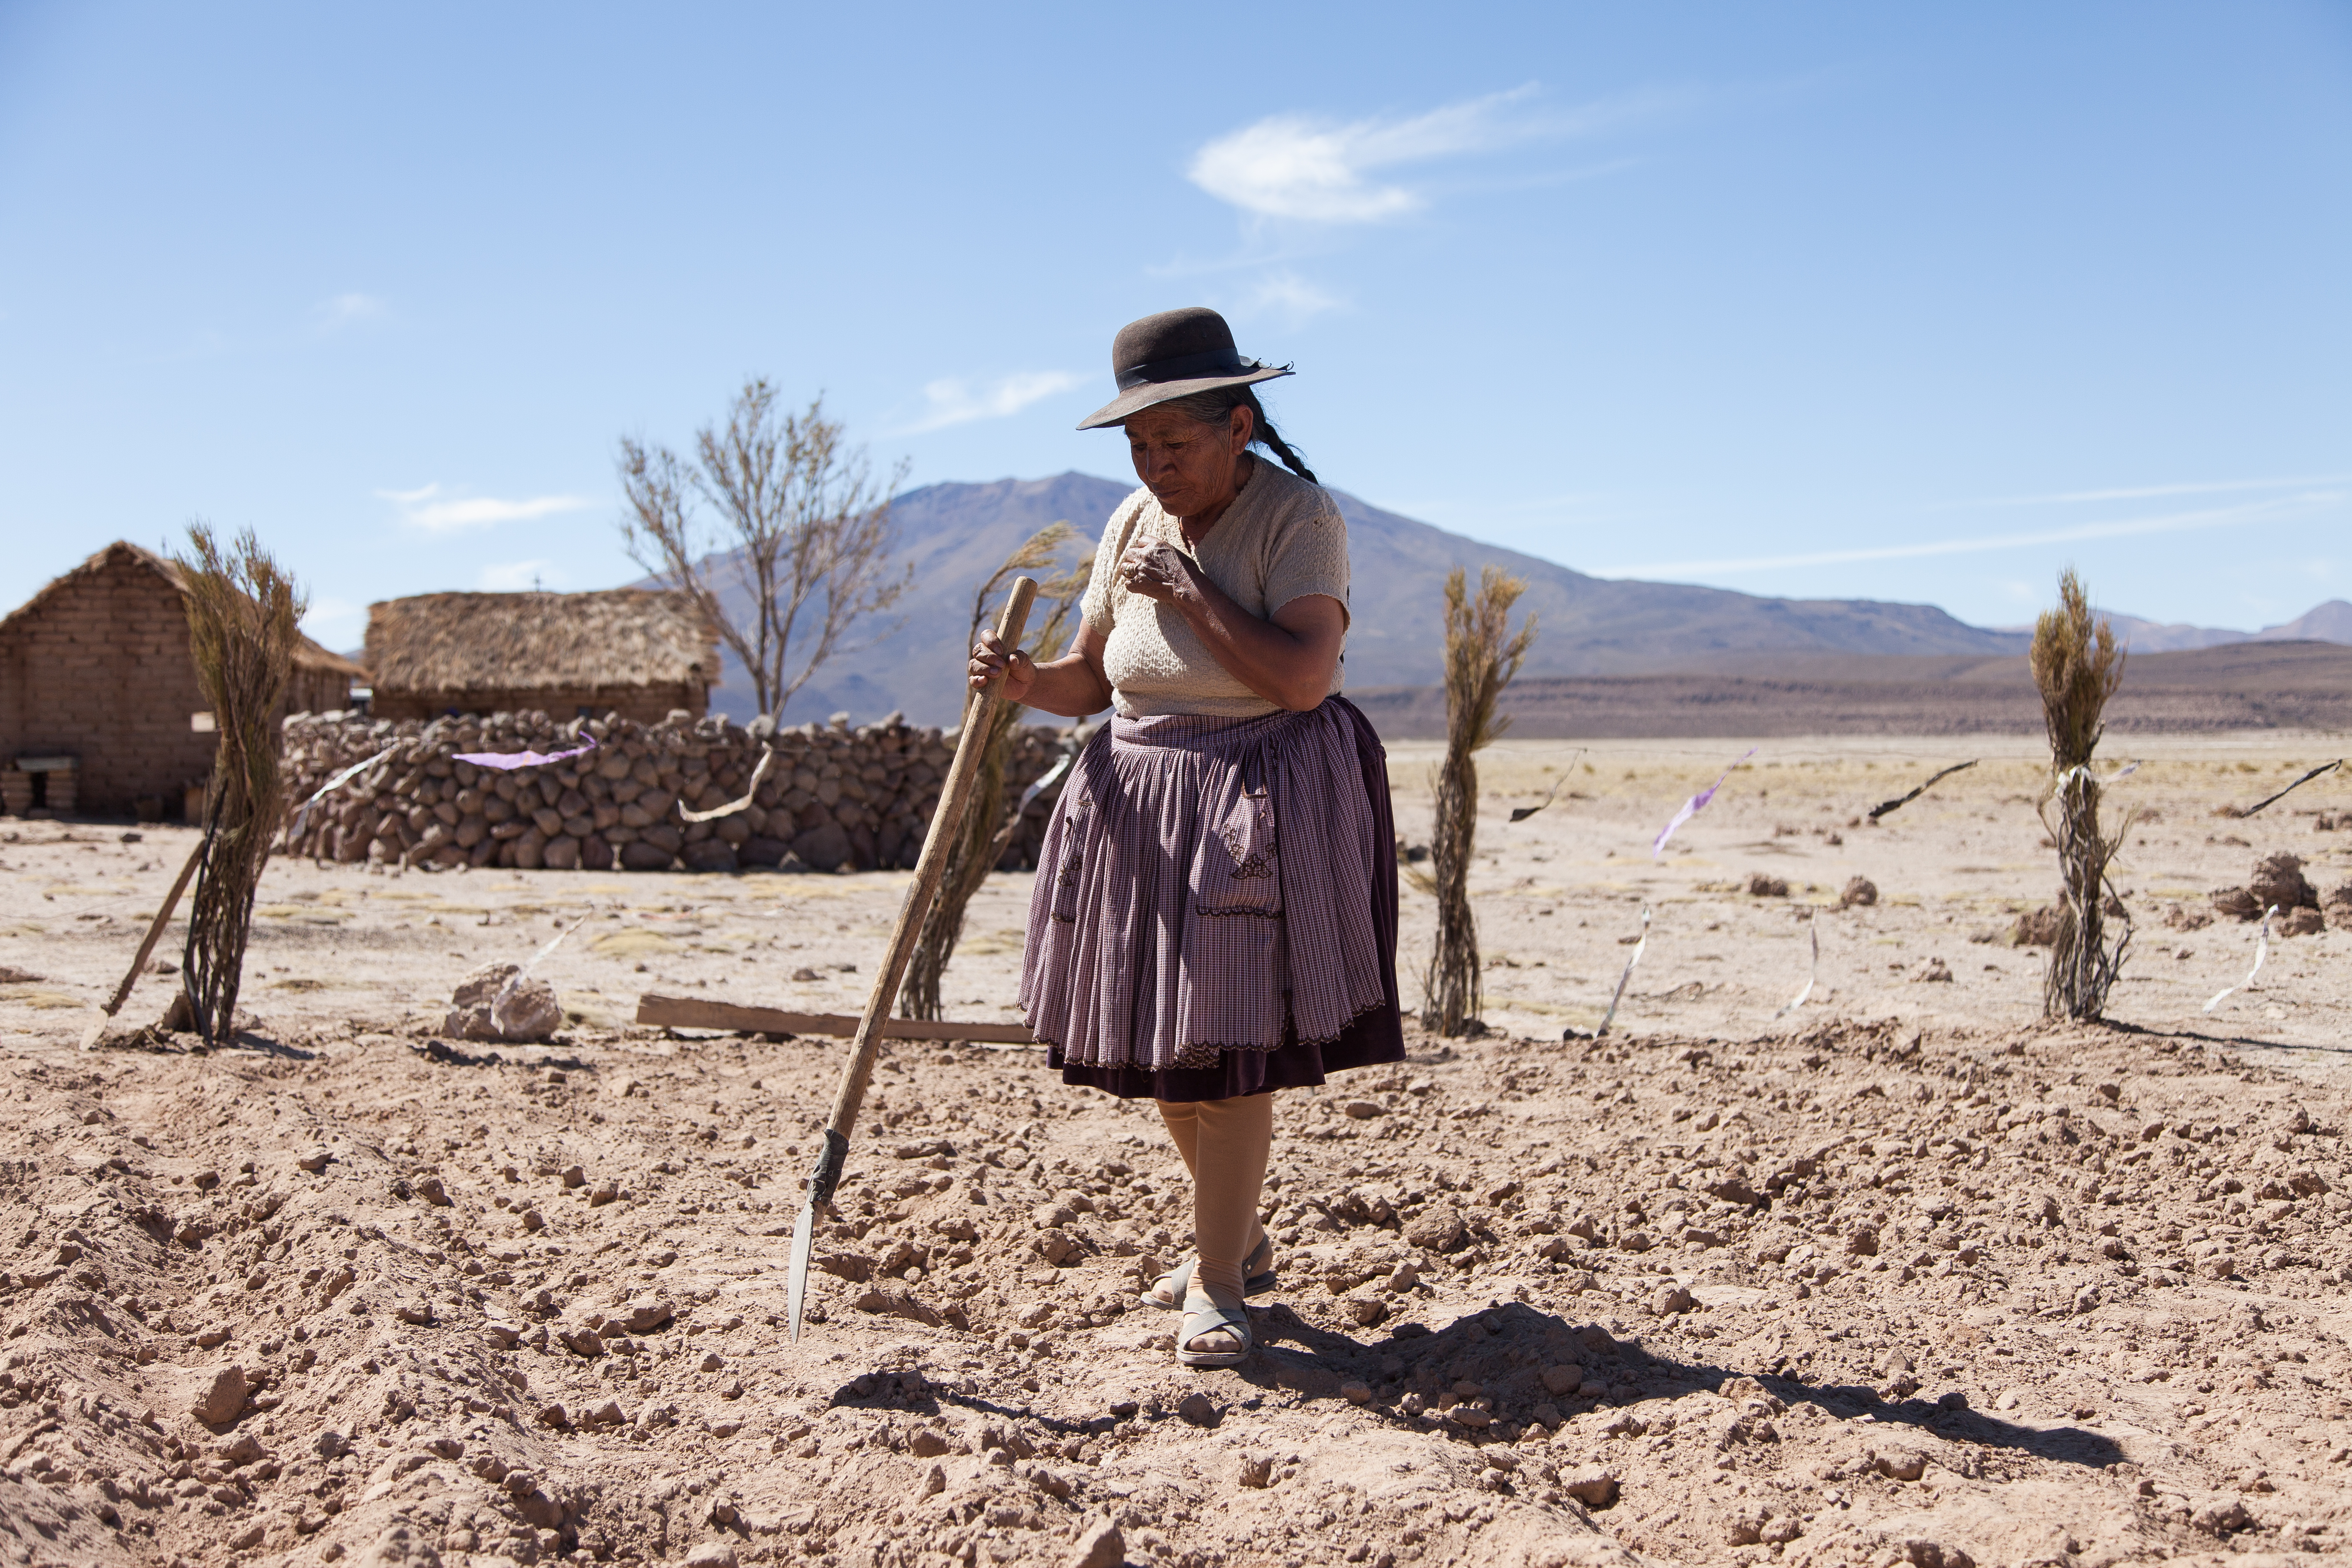 "Utama" stands for "our home" in the Quechua language / Photo: Kino Lorber, Cinema Tropical